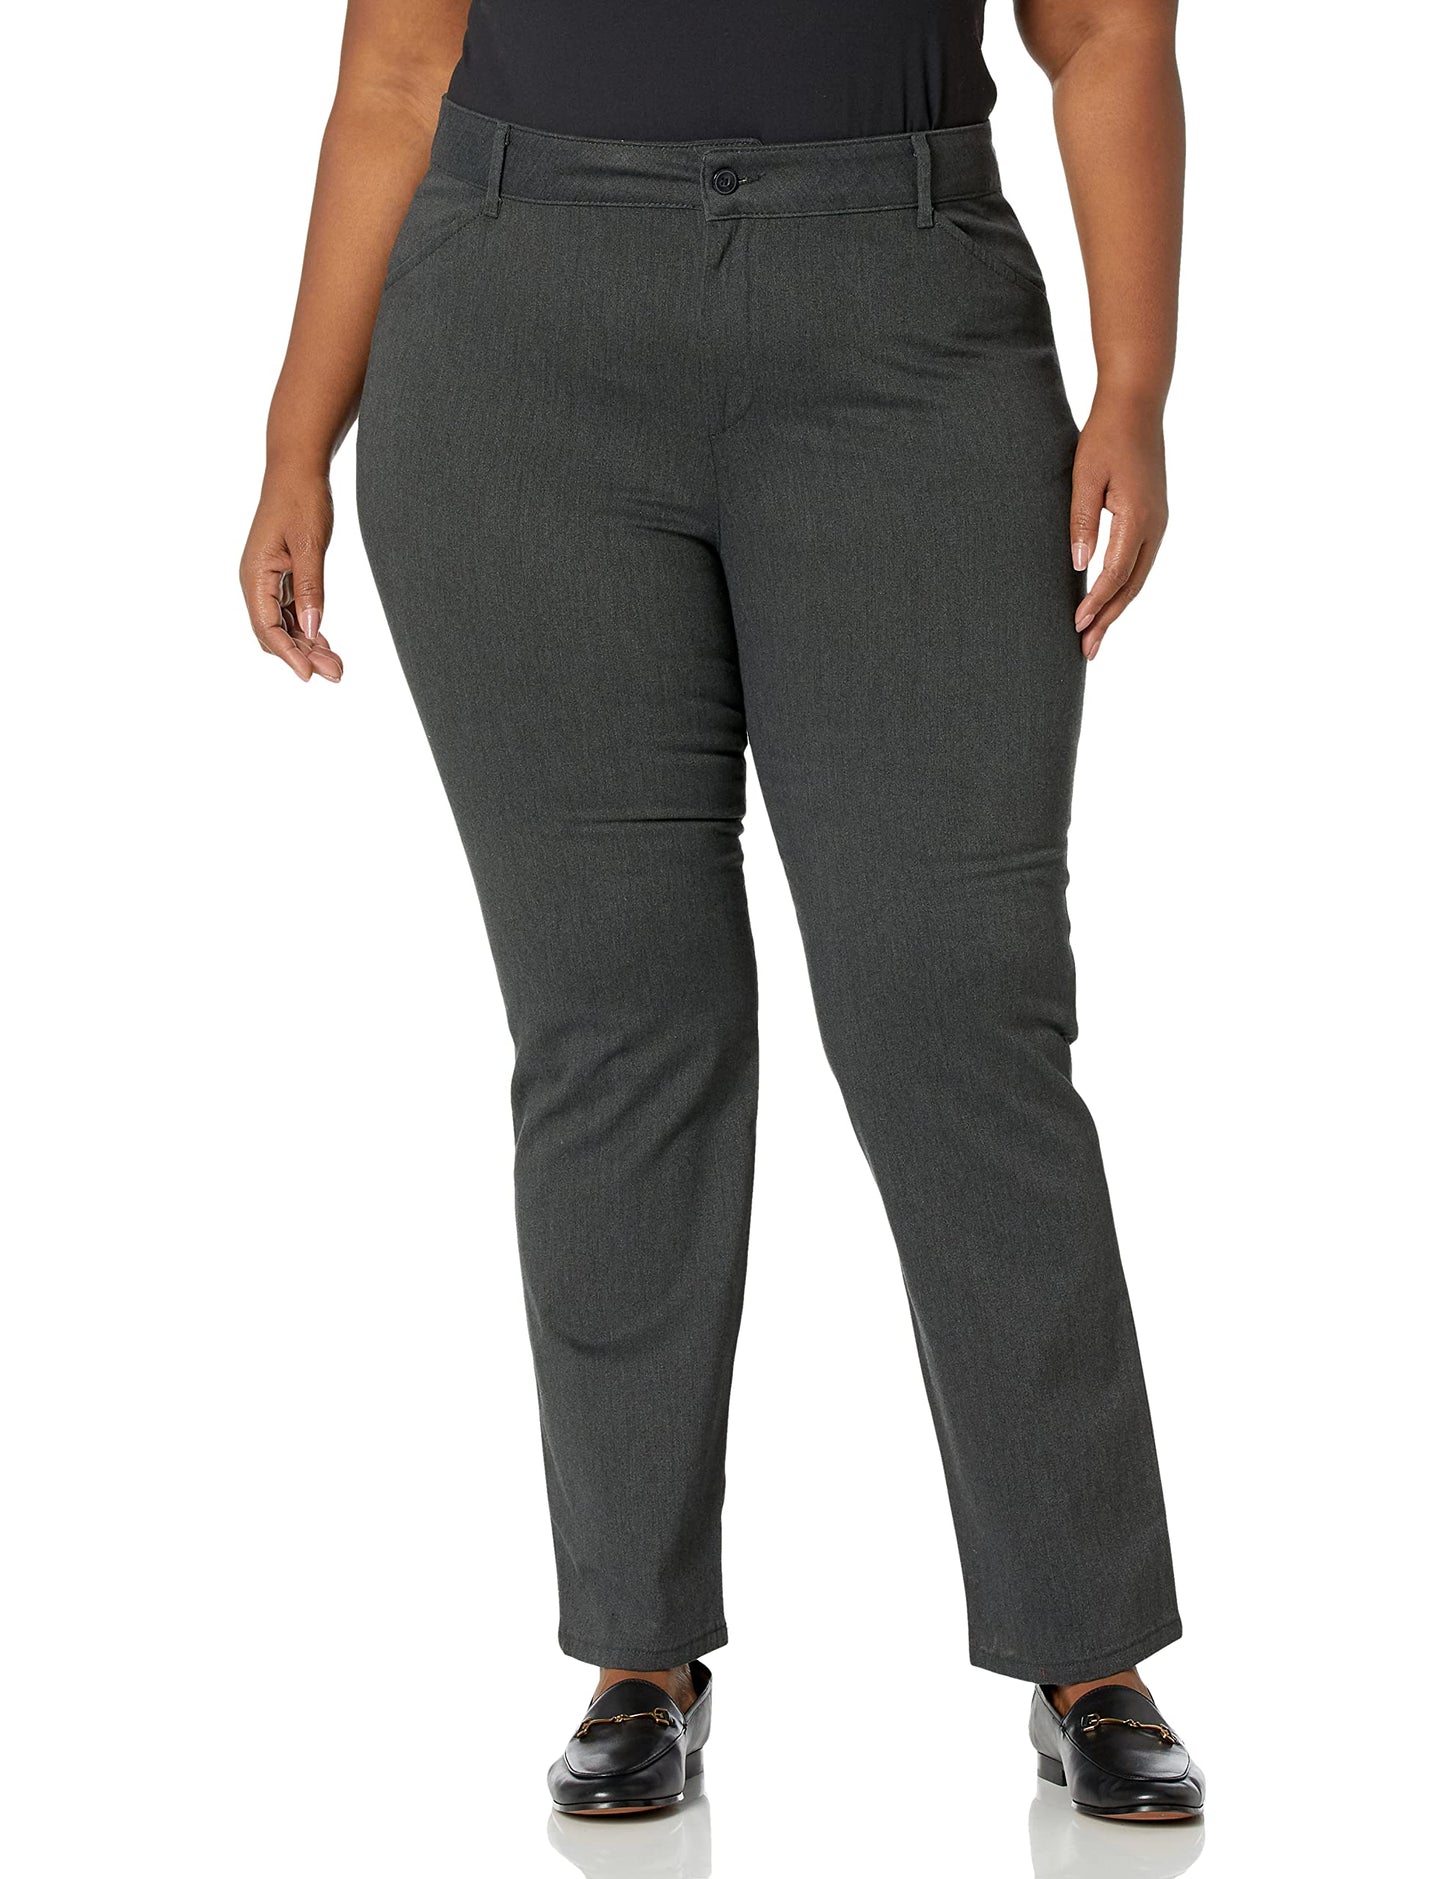 Lee Women's Relaxed Fit All Day Straight Leg Pant Charcoal Heather 18